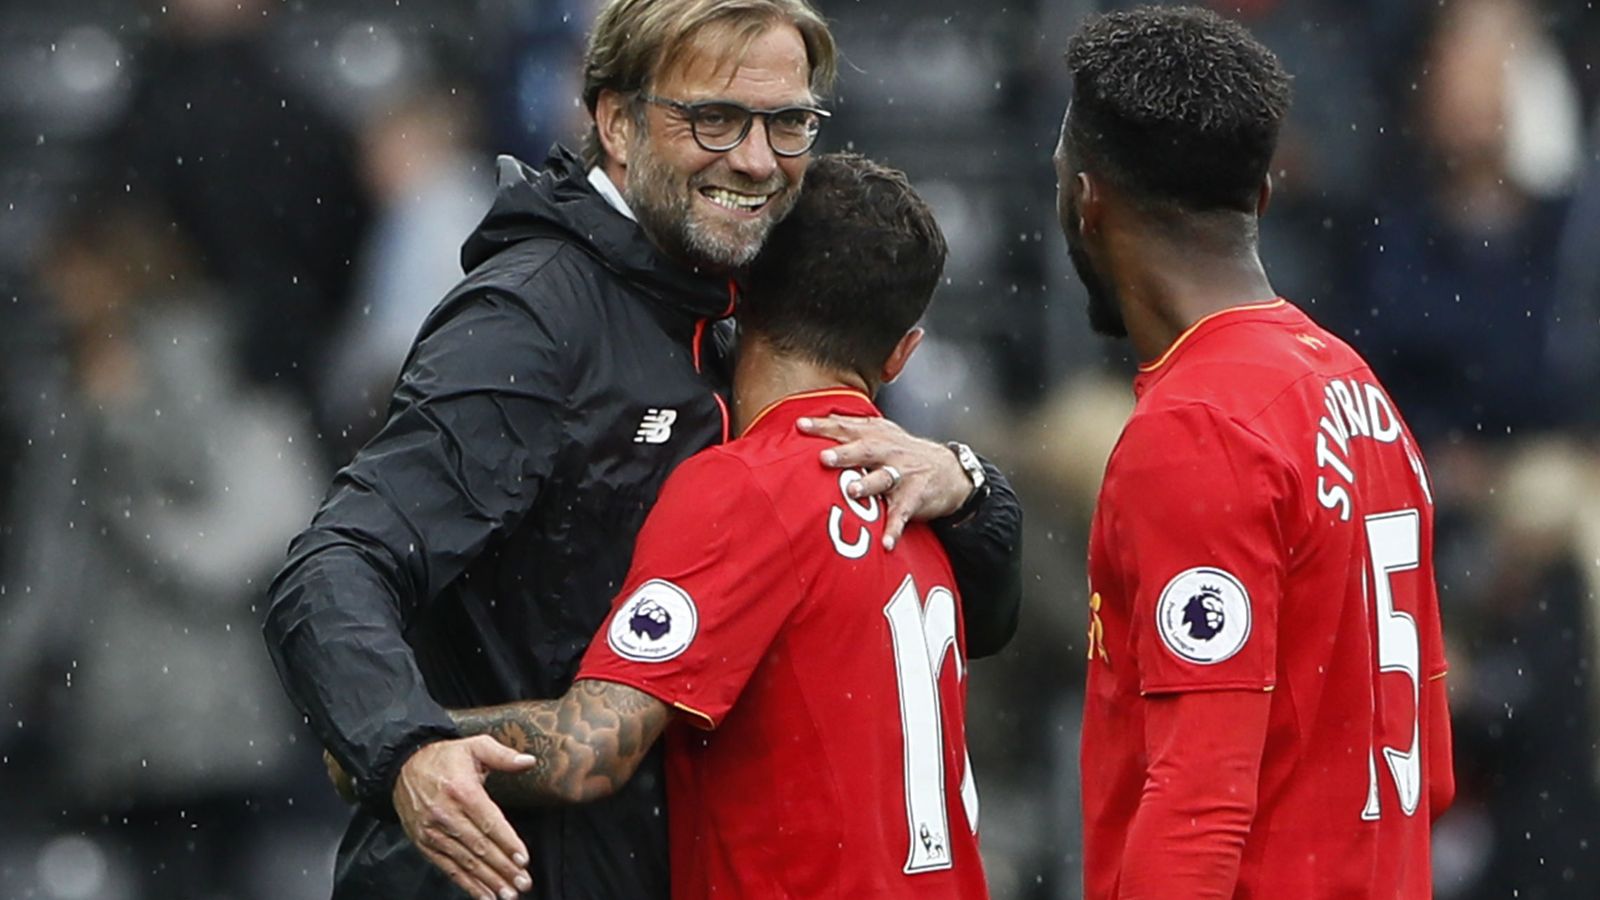 Foto: Liverpool manager juergen klopp celebrates with philippe coutinho and daniel sturridge at the end of the match